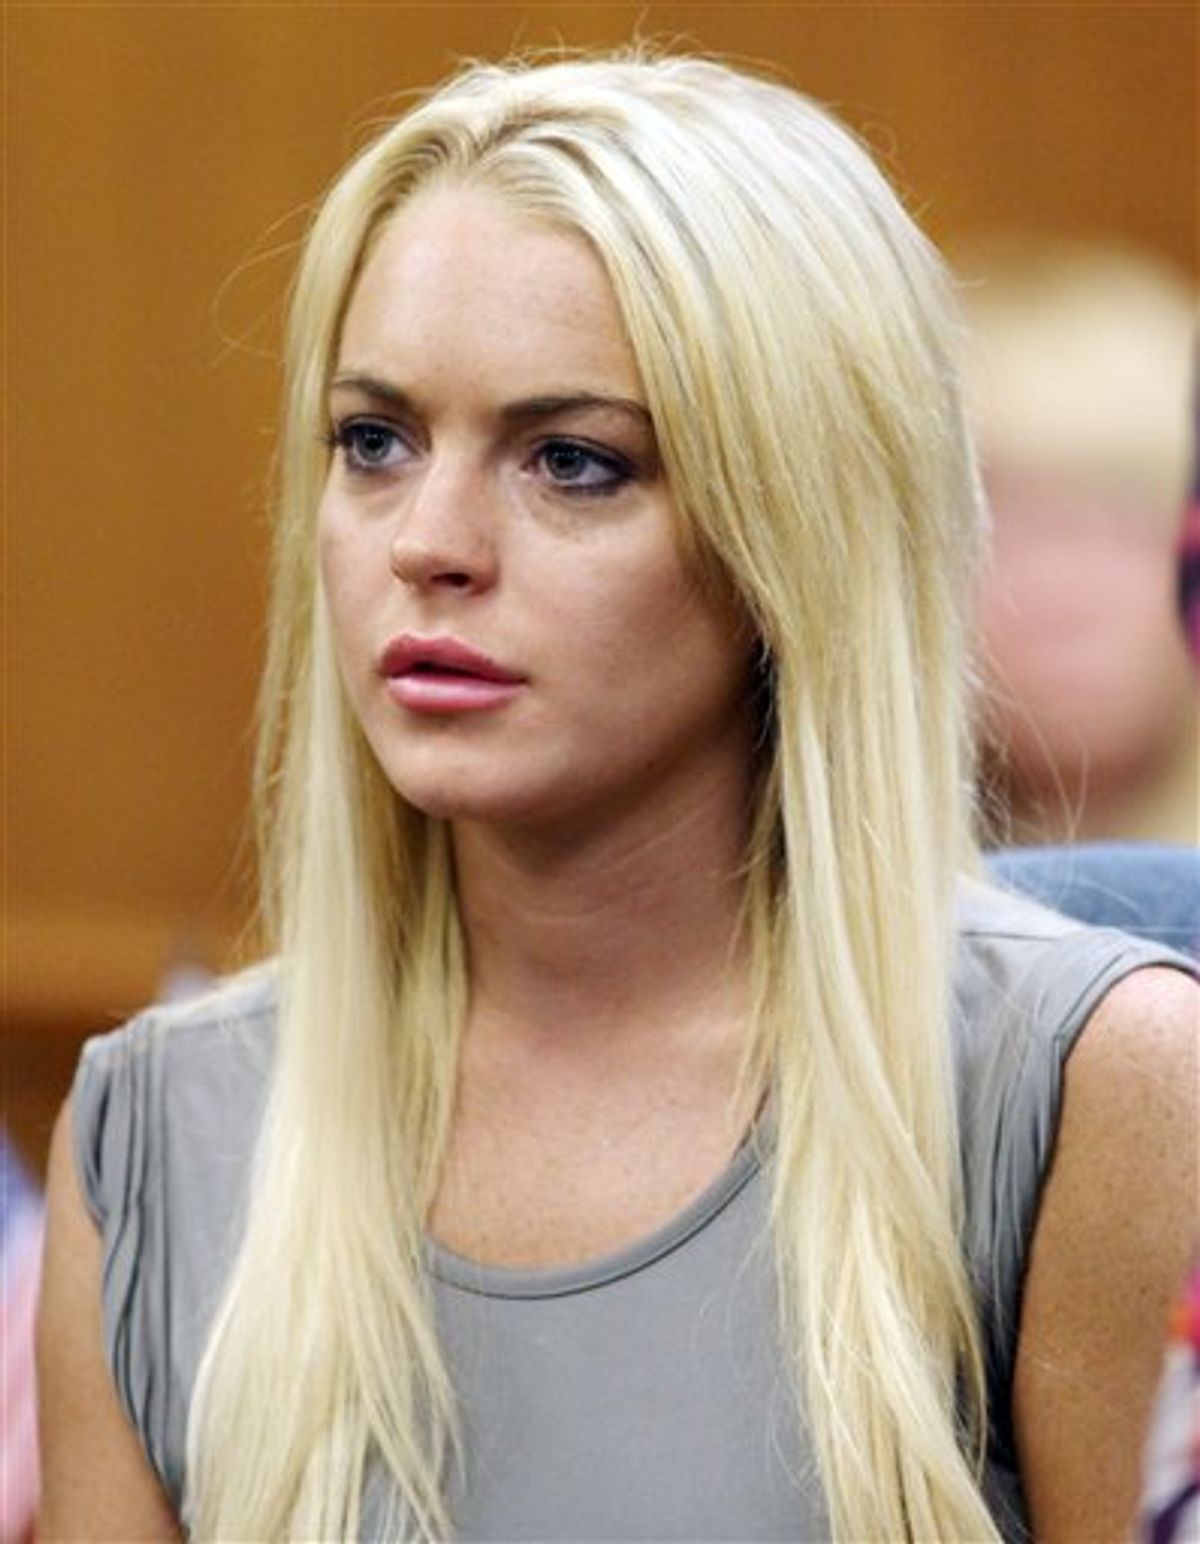 FILE - In this July 20, 2010 file photo, Lindsay Lohan listens during a court hearing in Beverly Hills, Calif. (AP Photo/ Los Angeles Times, Al Seib, pool) (AP)